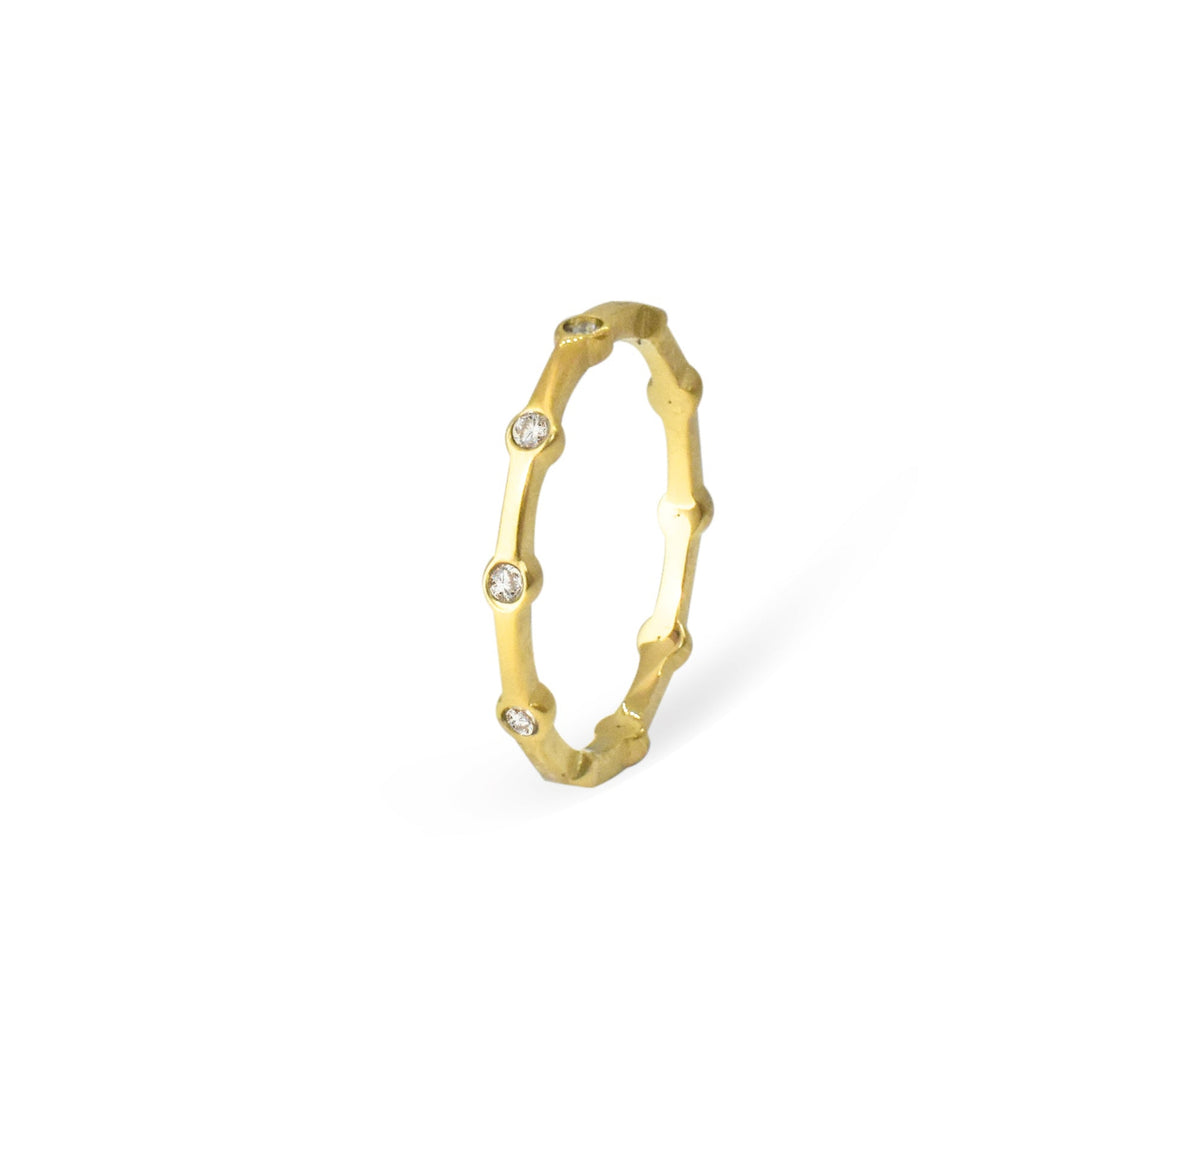  THIN GOLD PAVE RING WATERPROOF JEWELRY